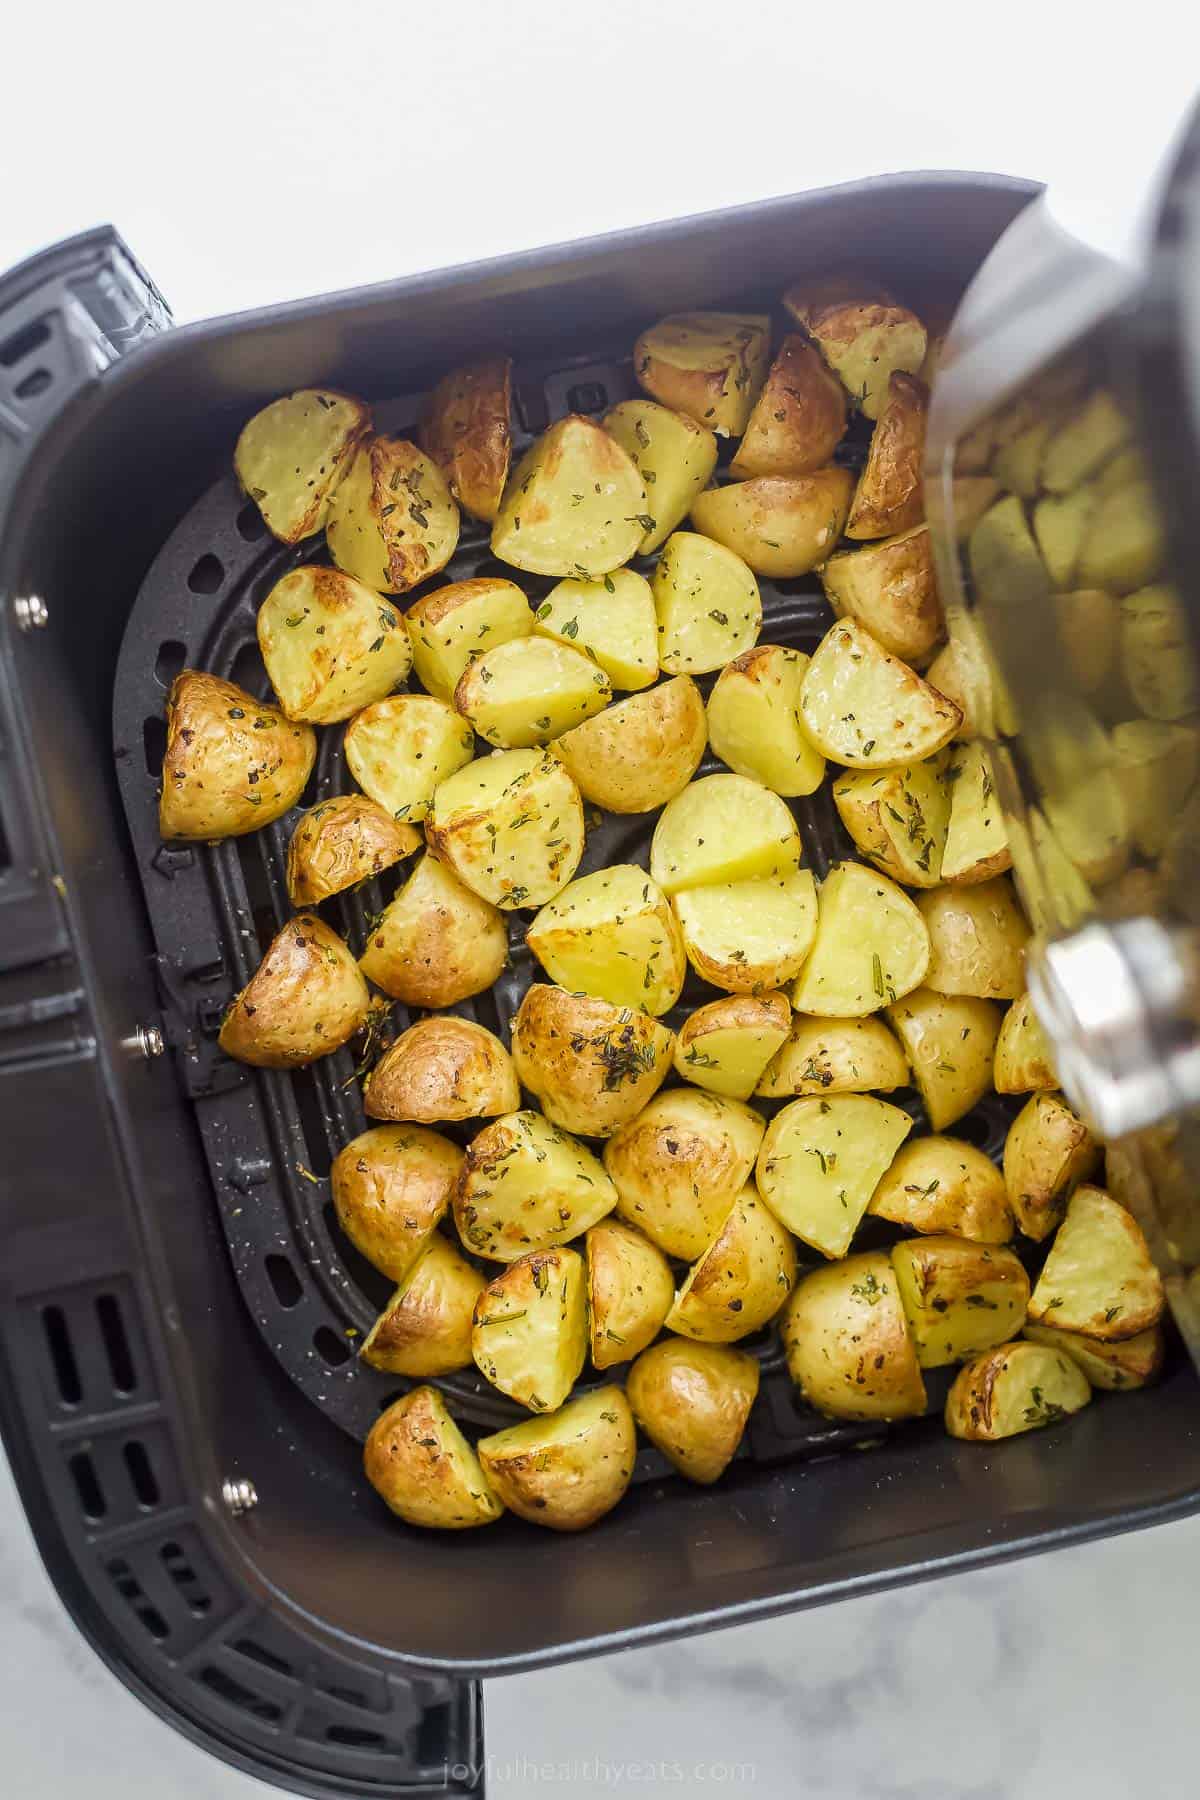 cut up potatoes in the air fryer